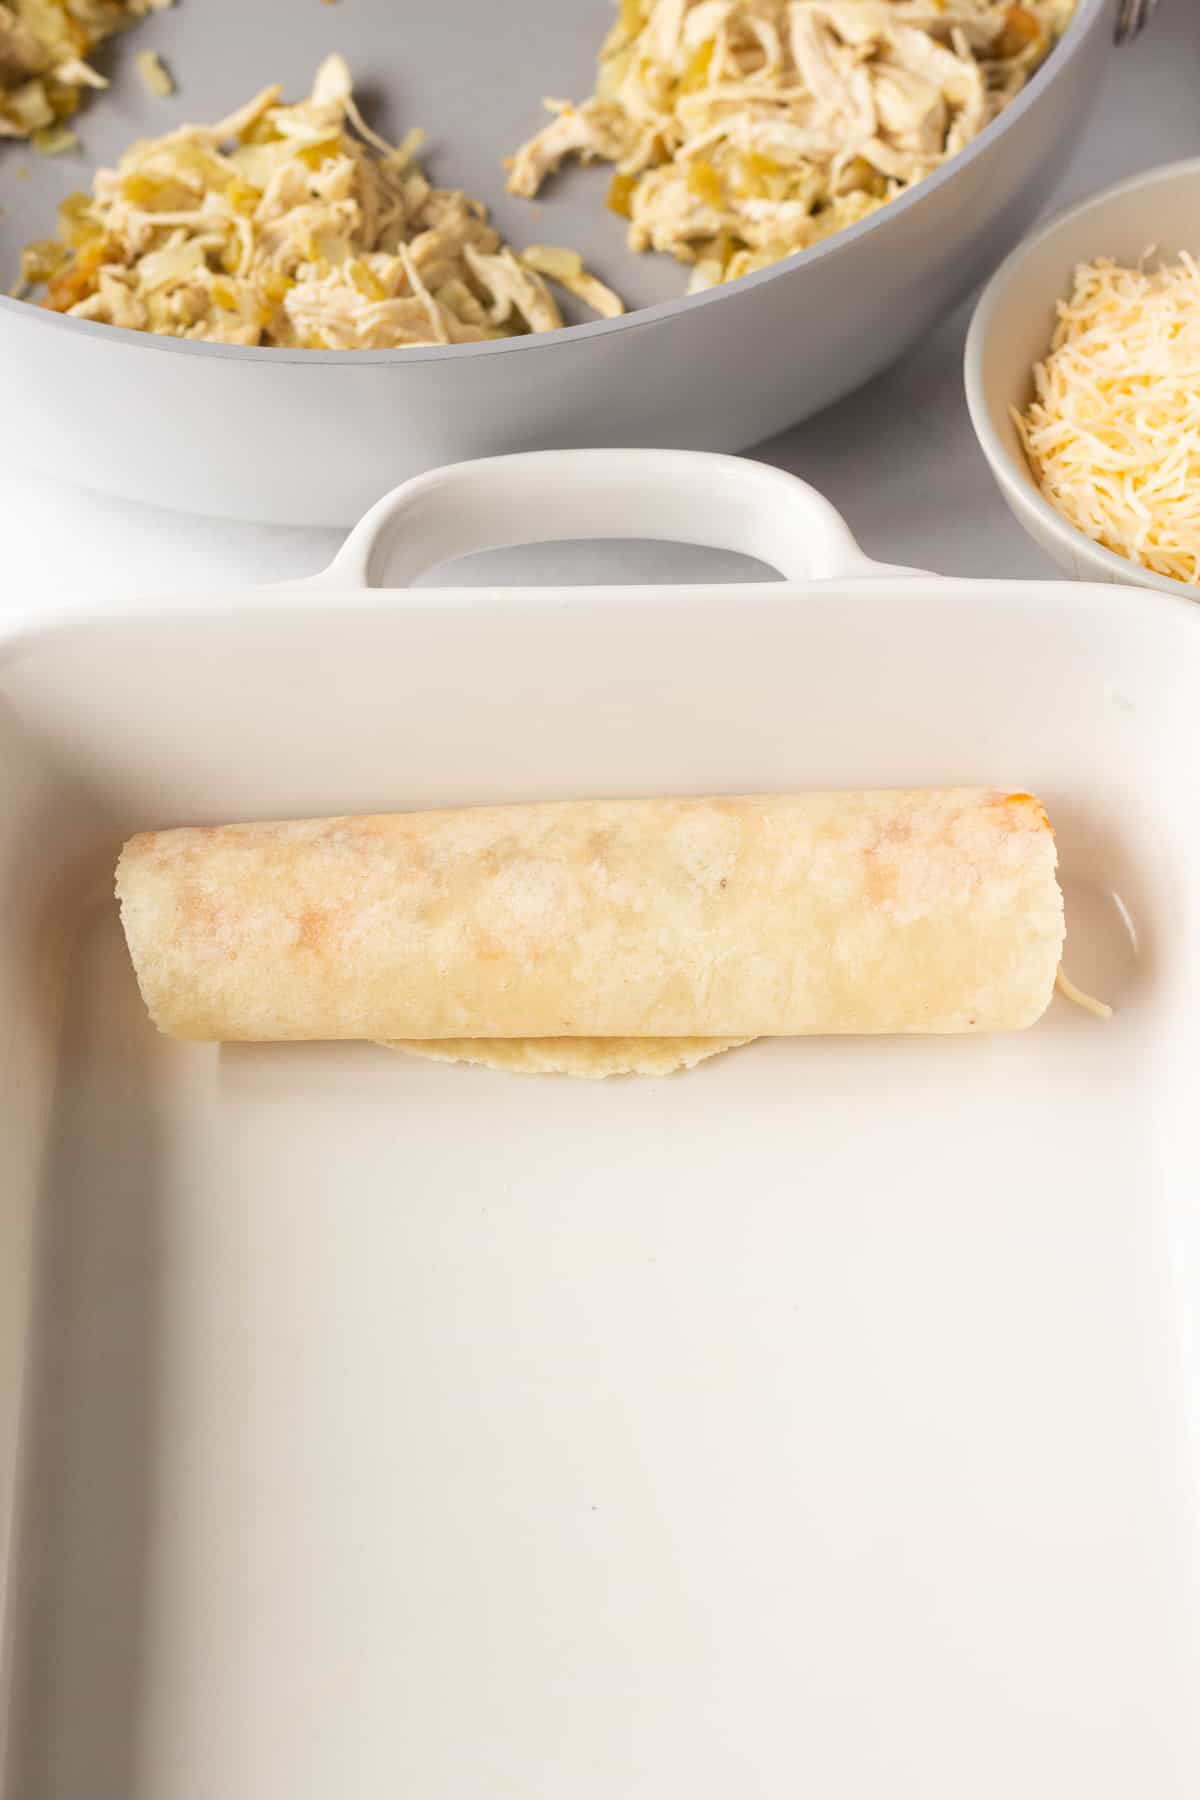 A rolled up tortilla with chicken and enchilada sauce in it, in a white casserole dish.